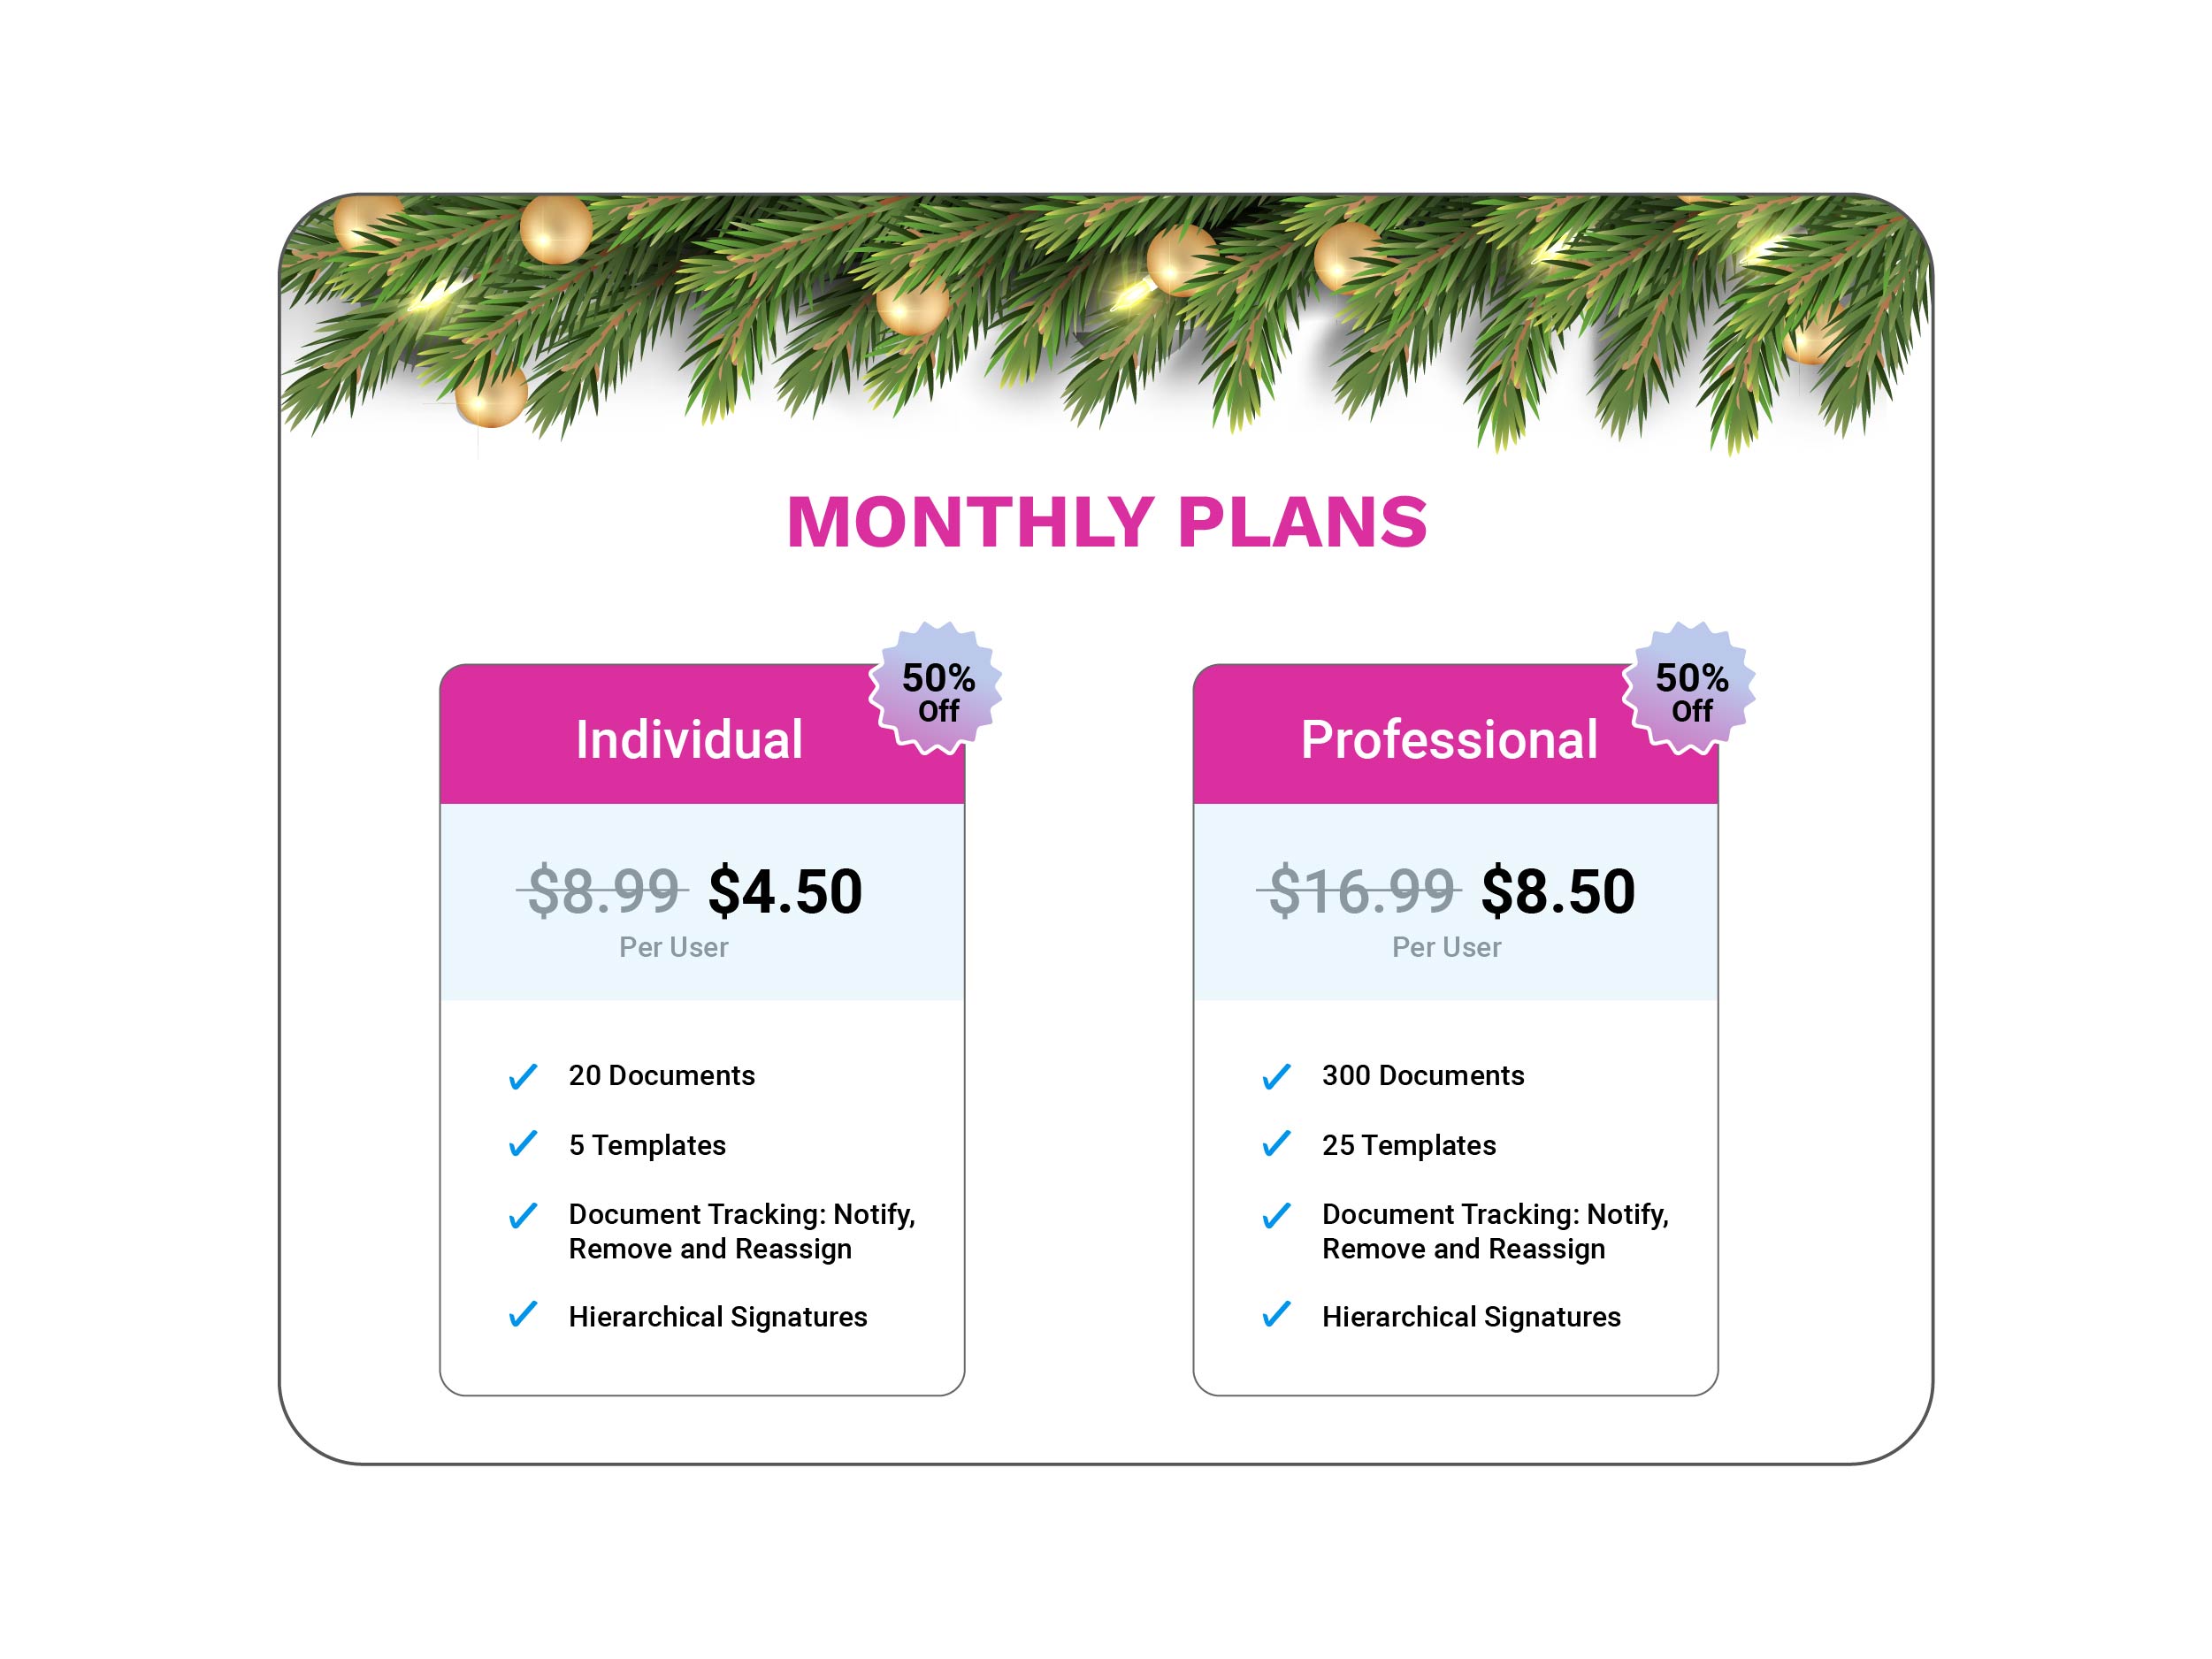 DrySign introduces 50% off on Monthly Plans!